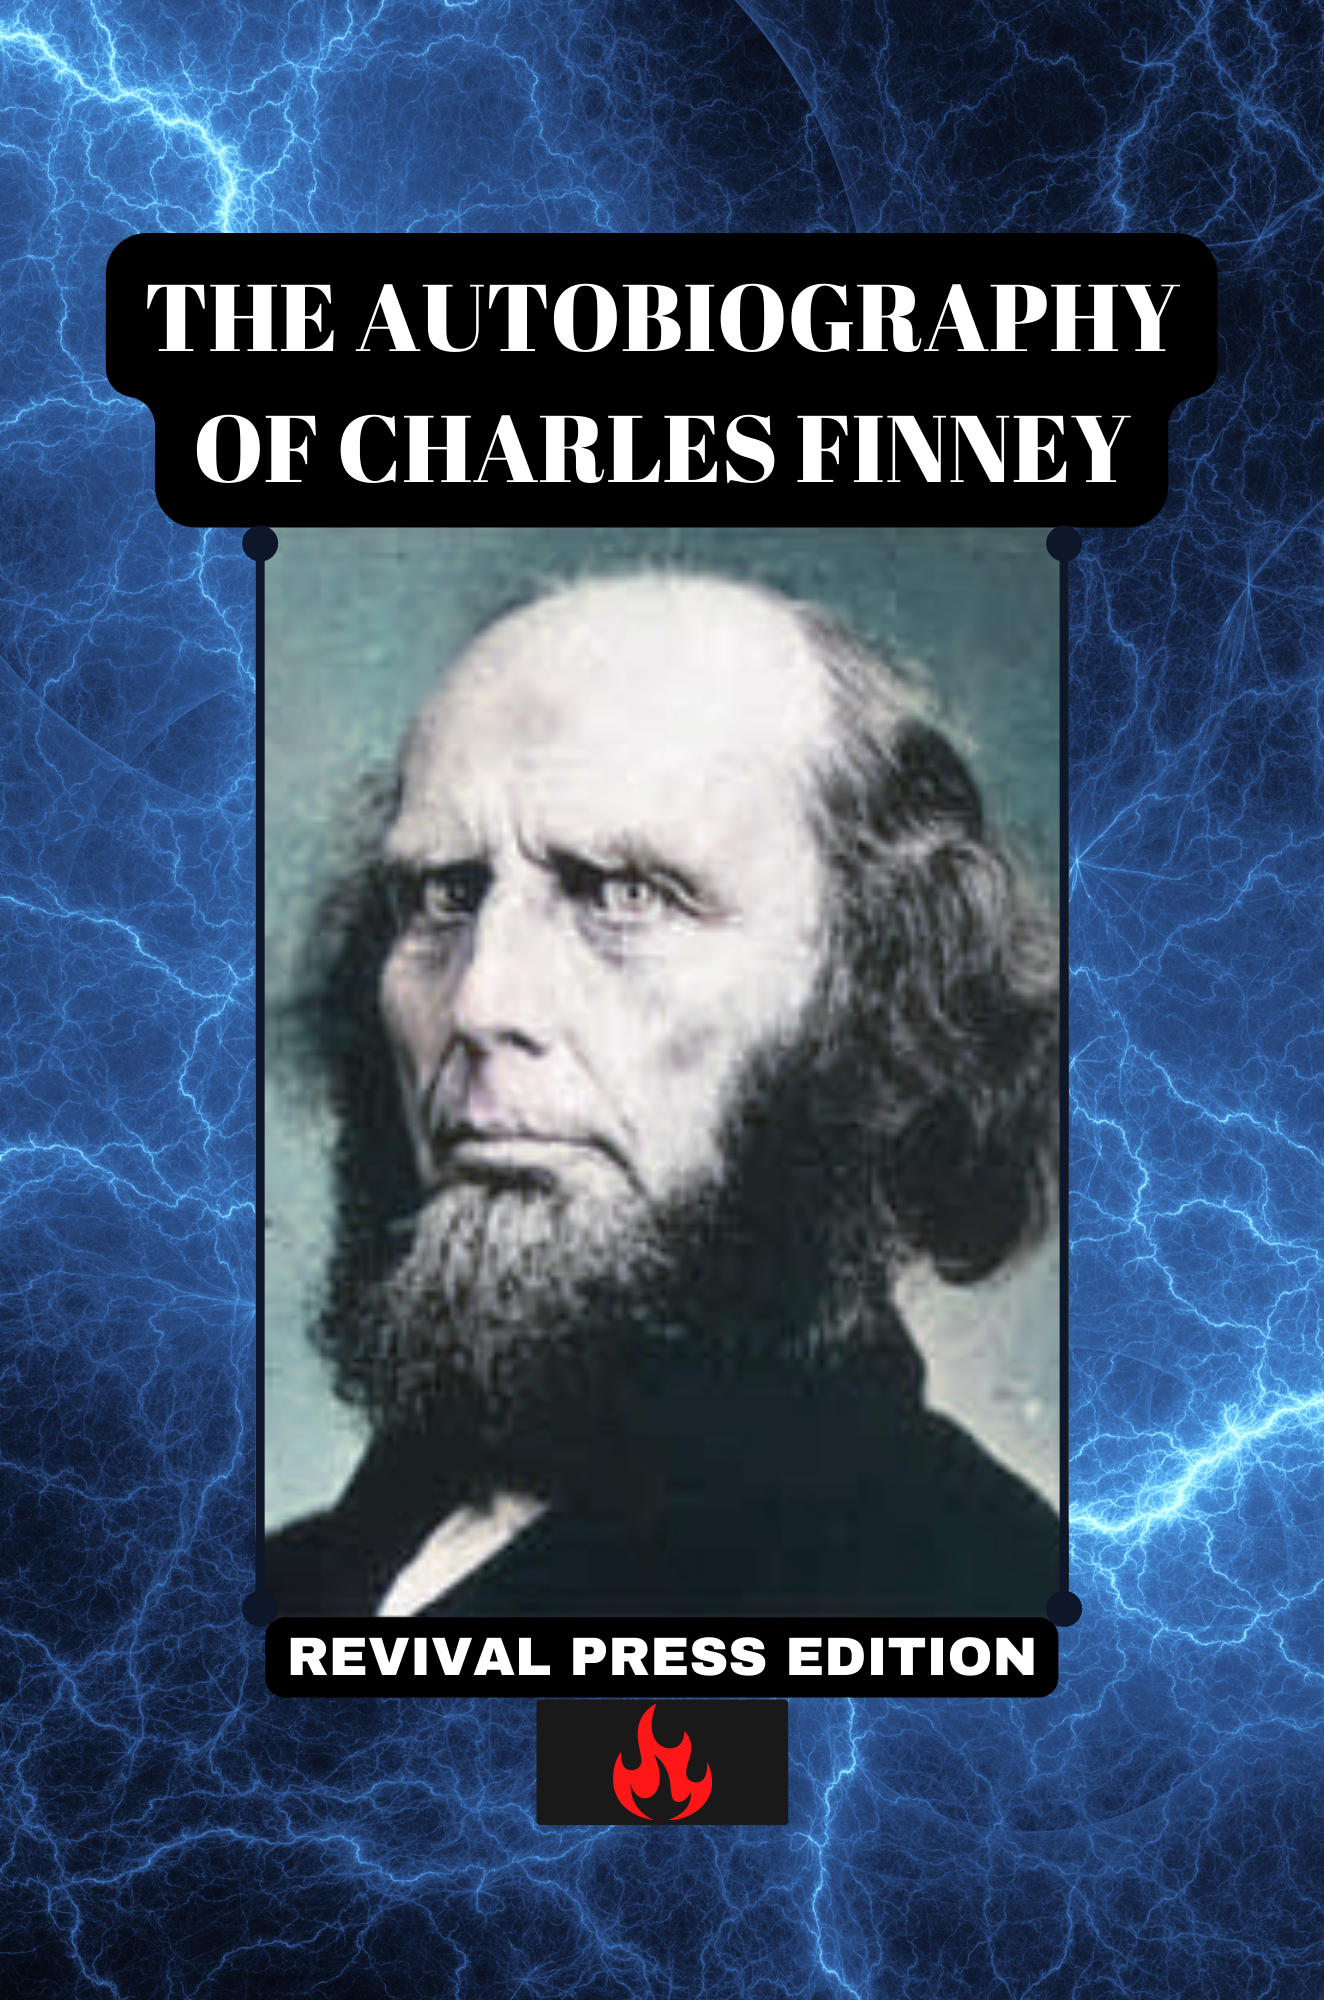 THE AUTOBIOGRAPHY OF CHARLES FINNEY (E-BOOK)